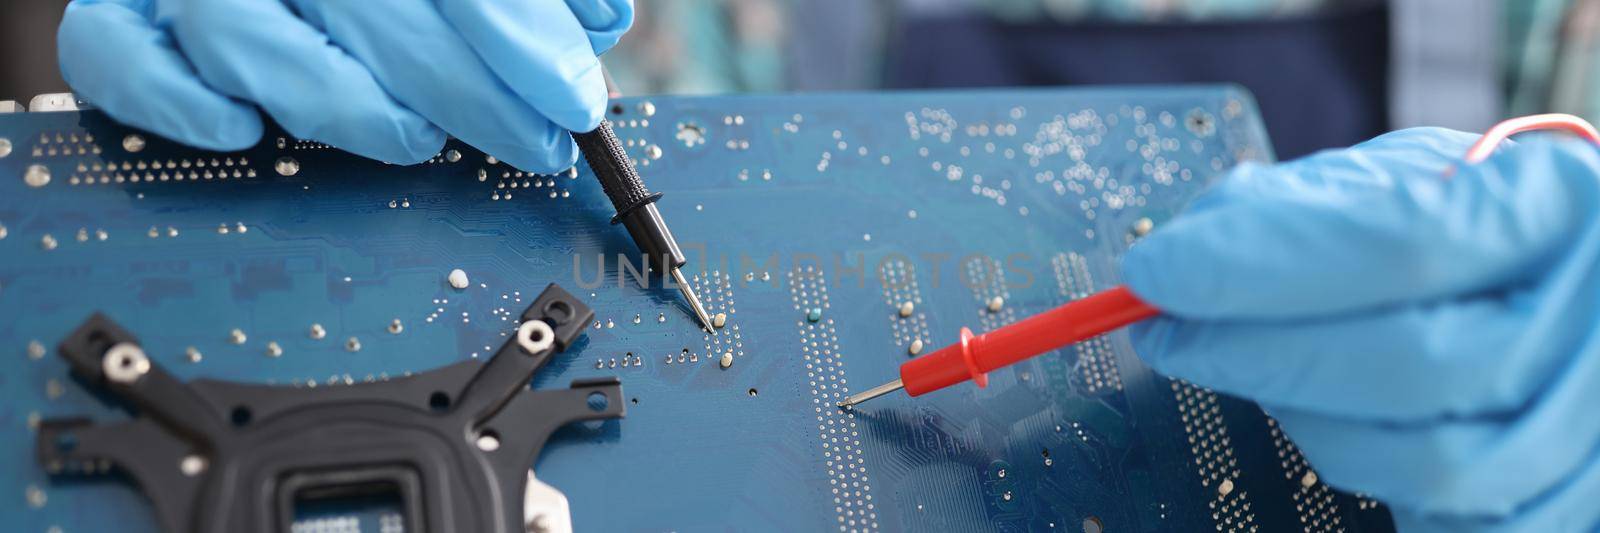 Repairman diagnosing breakdown in computer motherboard using tester closeup. Repair and maintenance of computer equipment and electronics concept